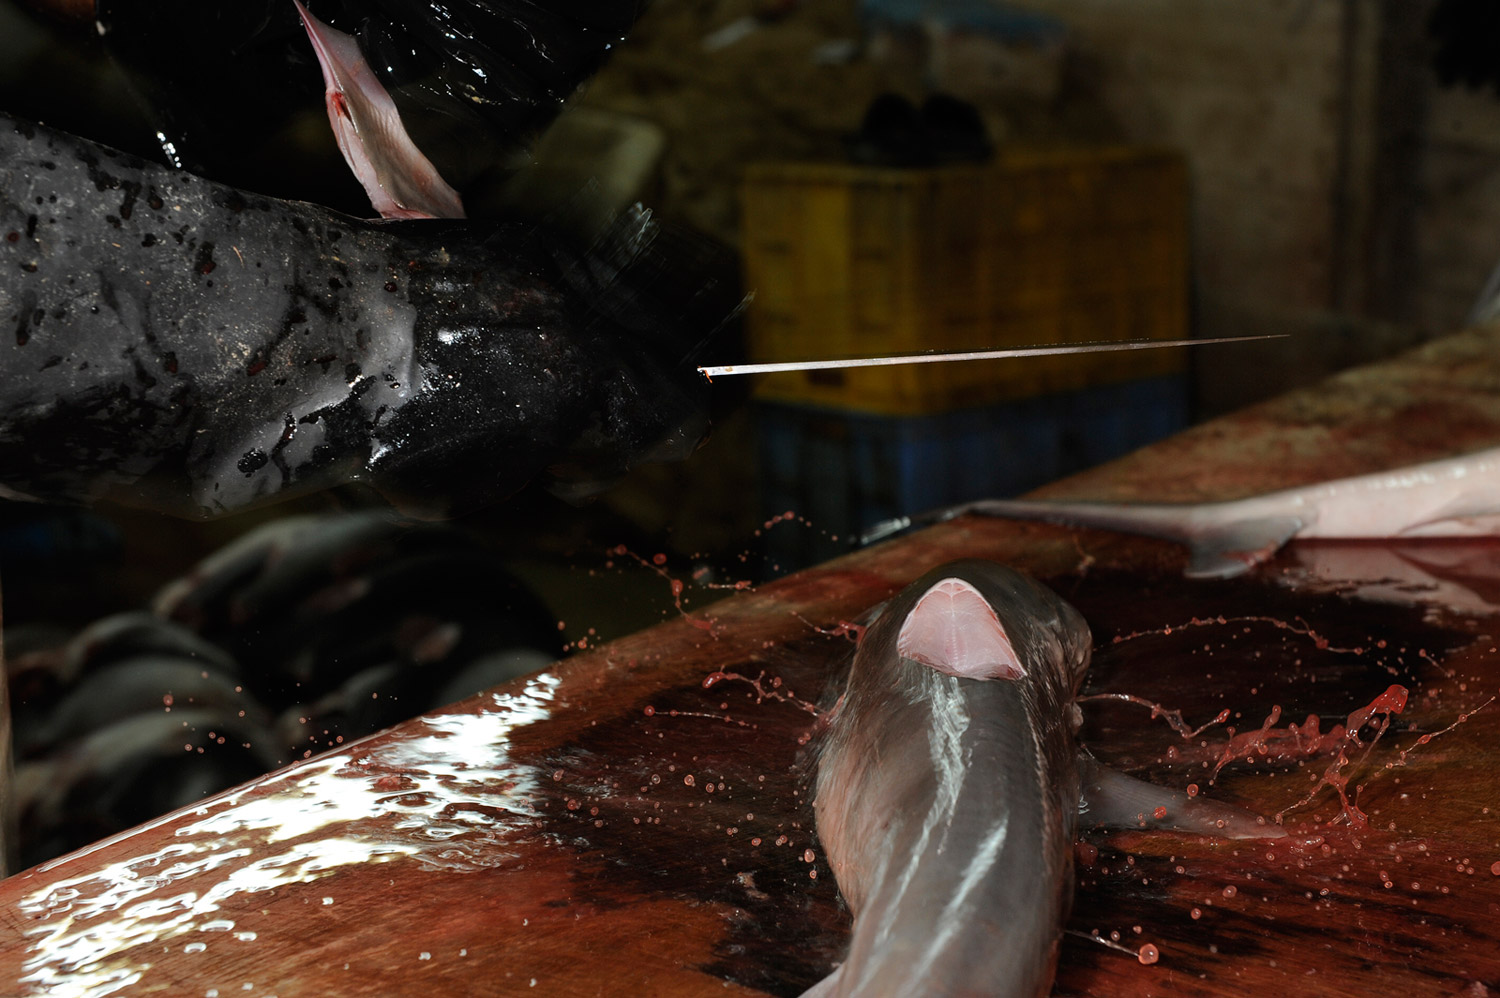 With a swift chop the dorsal fin of a milk shark is severed in a shark processing shed along Oman’s remote Sharqiya coast.